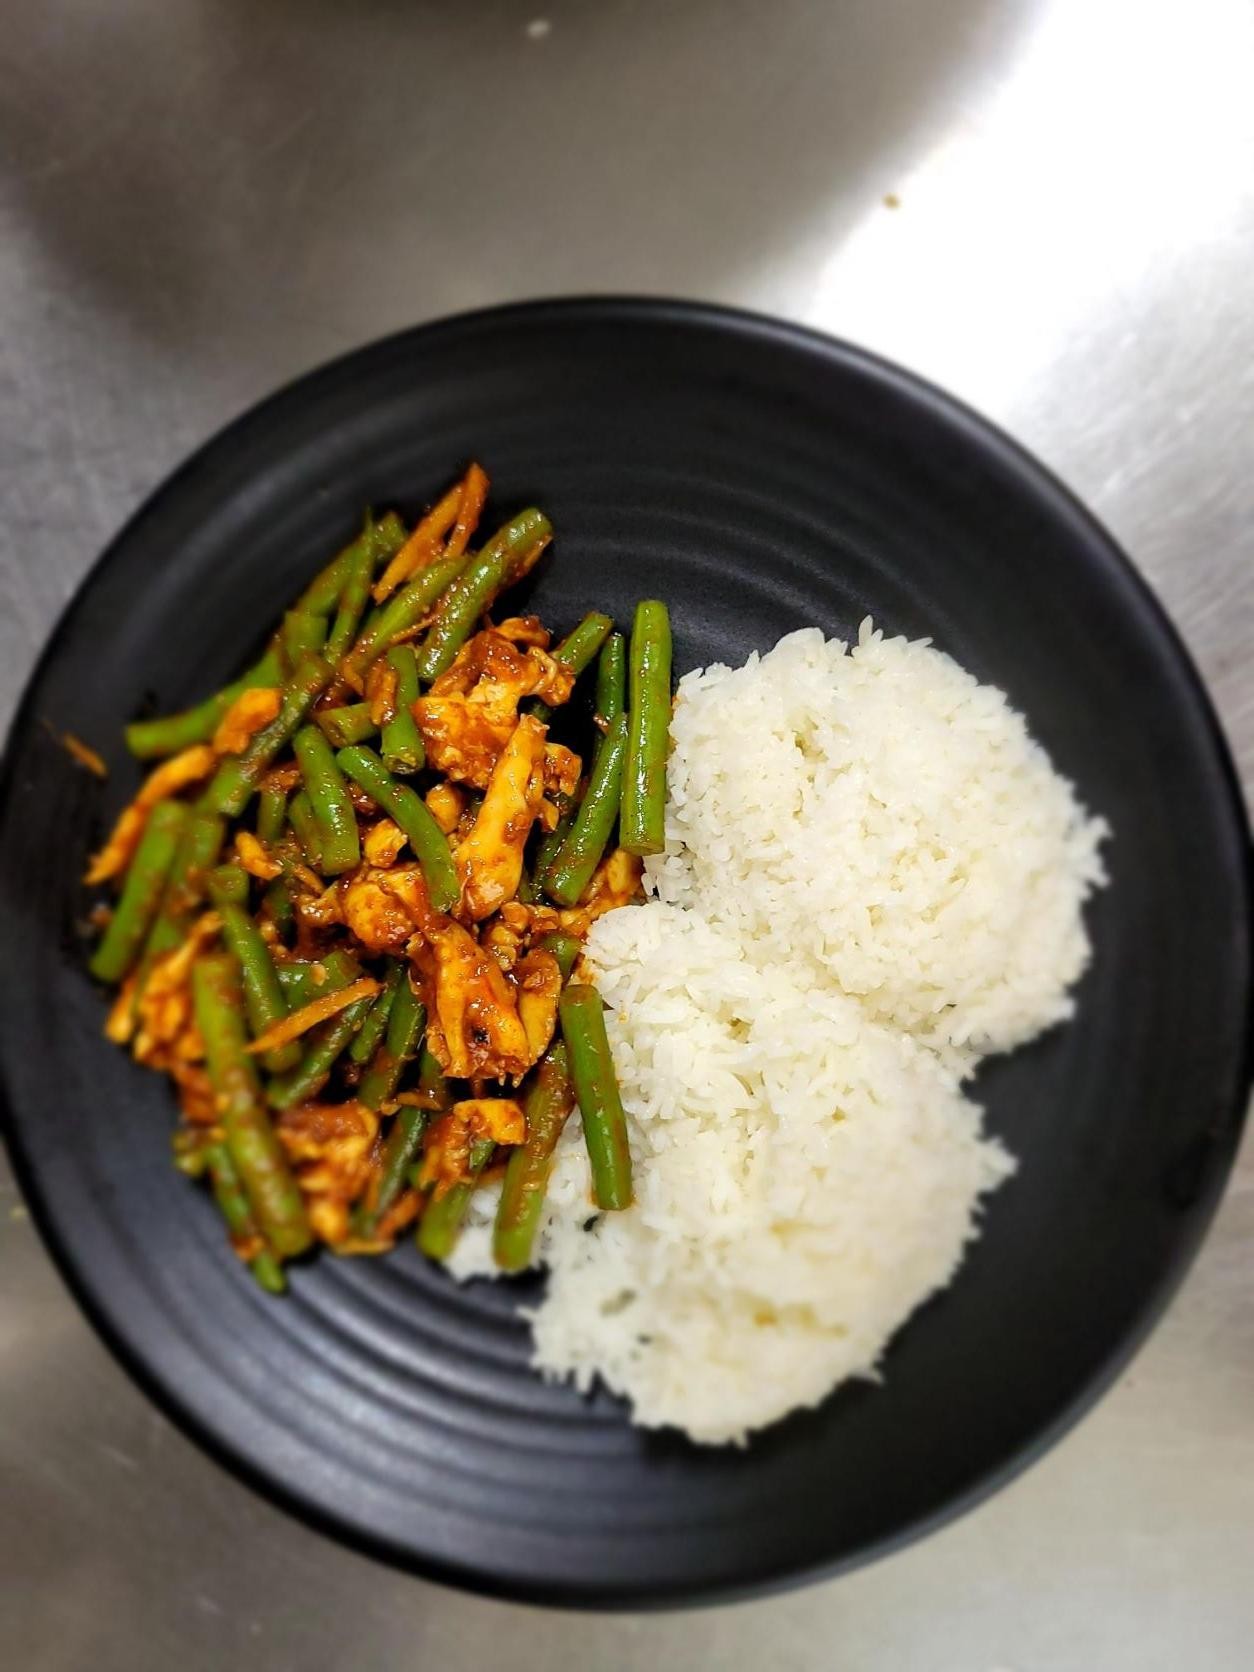 Pad Prik King (Stir Fried Spicy Chili Paste With Green Beans)